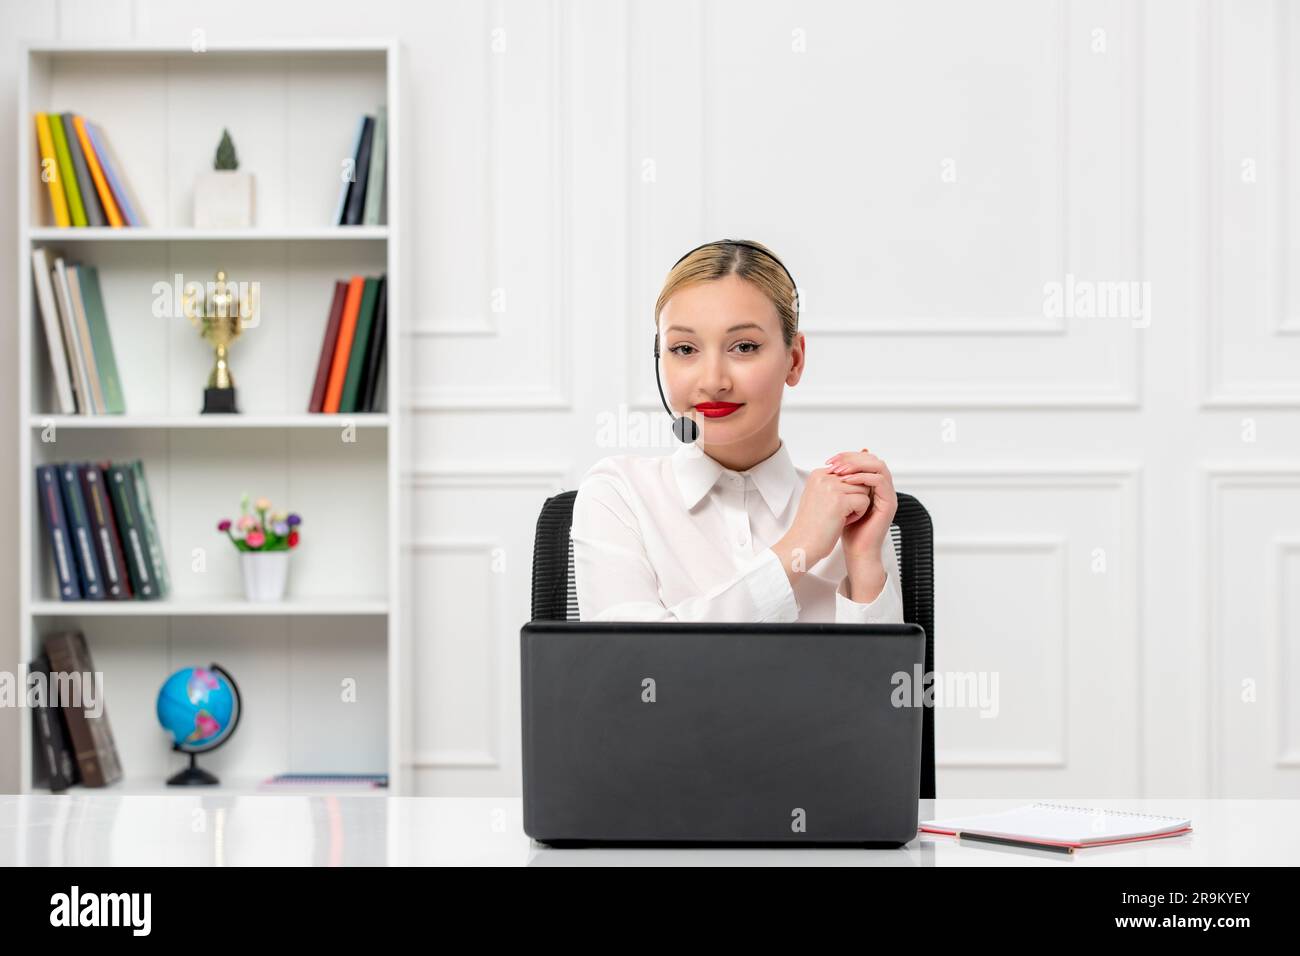 customer service cute blonde girl in office shirt with headset and computer smiling and greeting Stock Photo